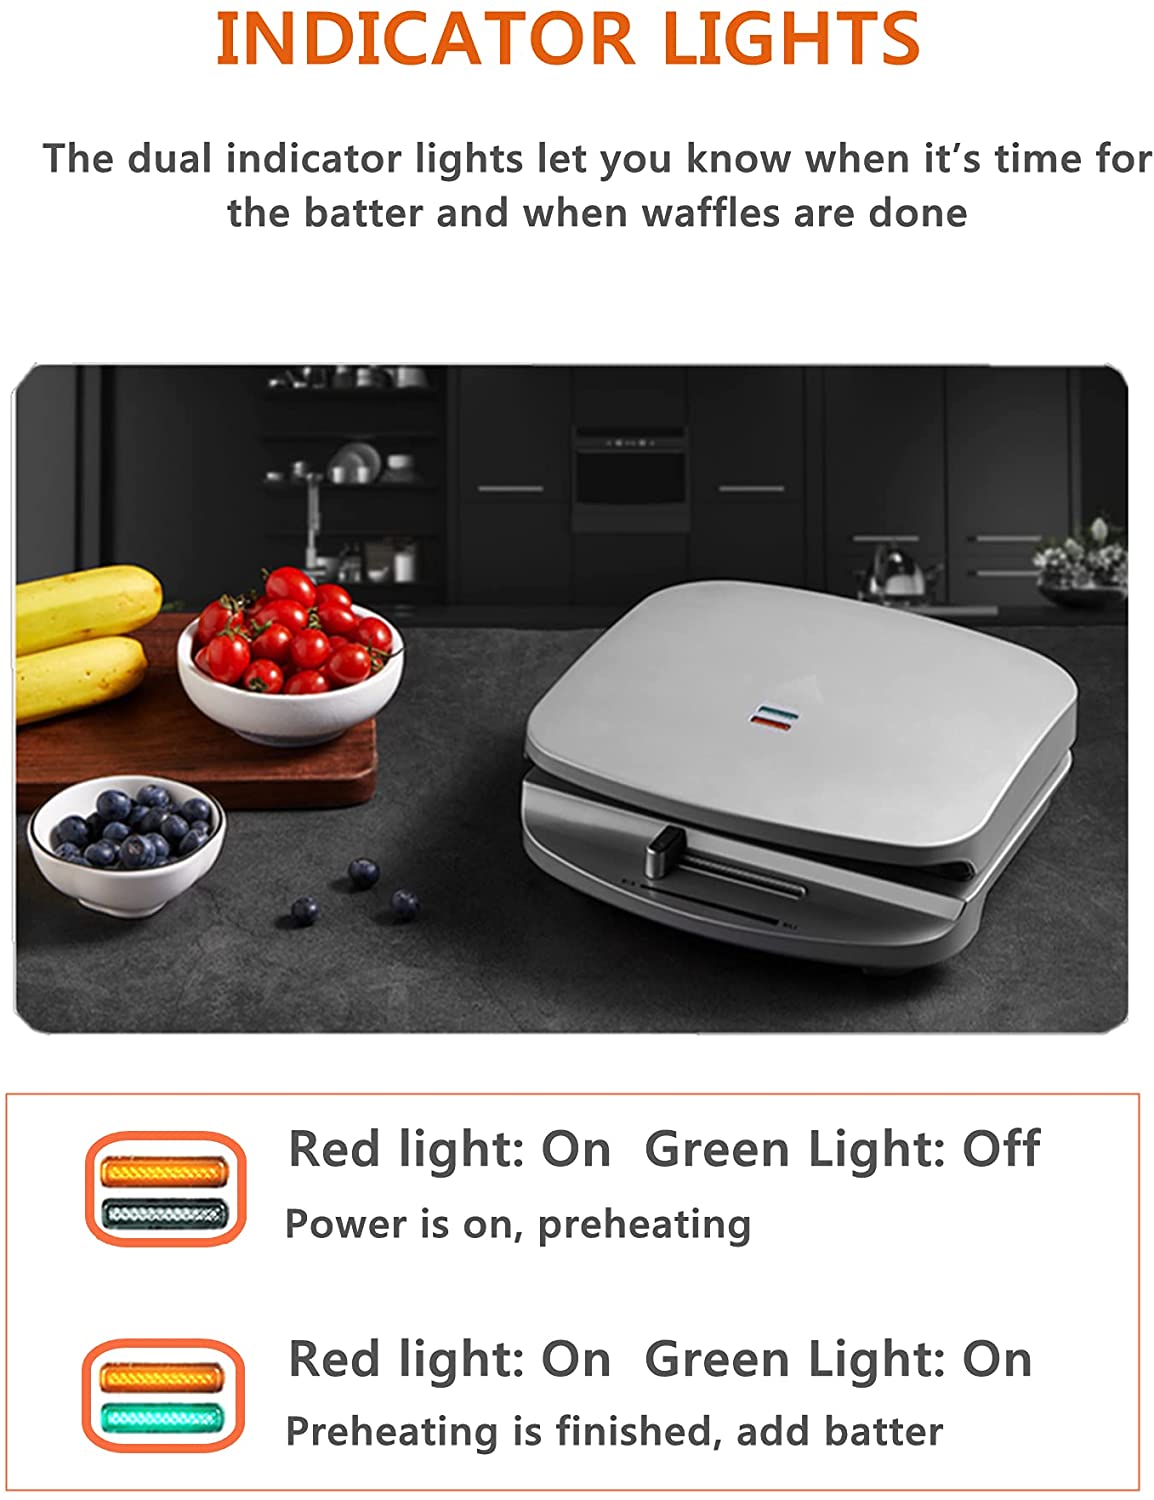 Belgian Waffle Maker, Non Stick Waffle Iron Machine with Adjustable Temperature Control, Indicator Lights, Compact Design, 1000W, 2 Slices, Silver